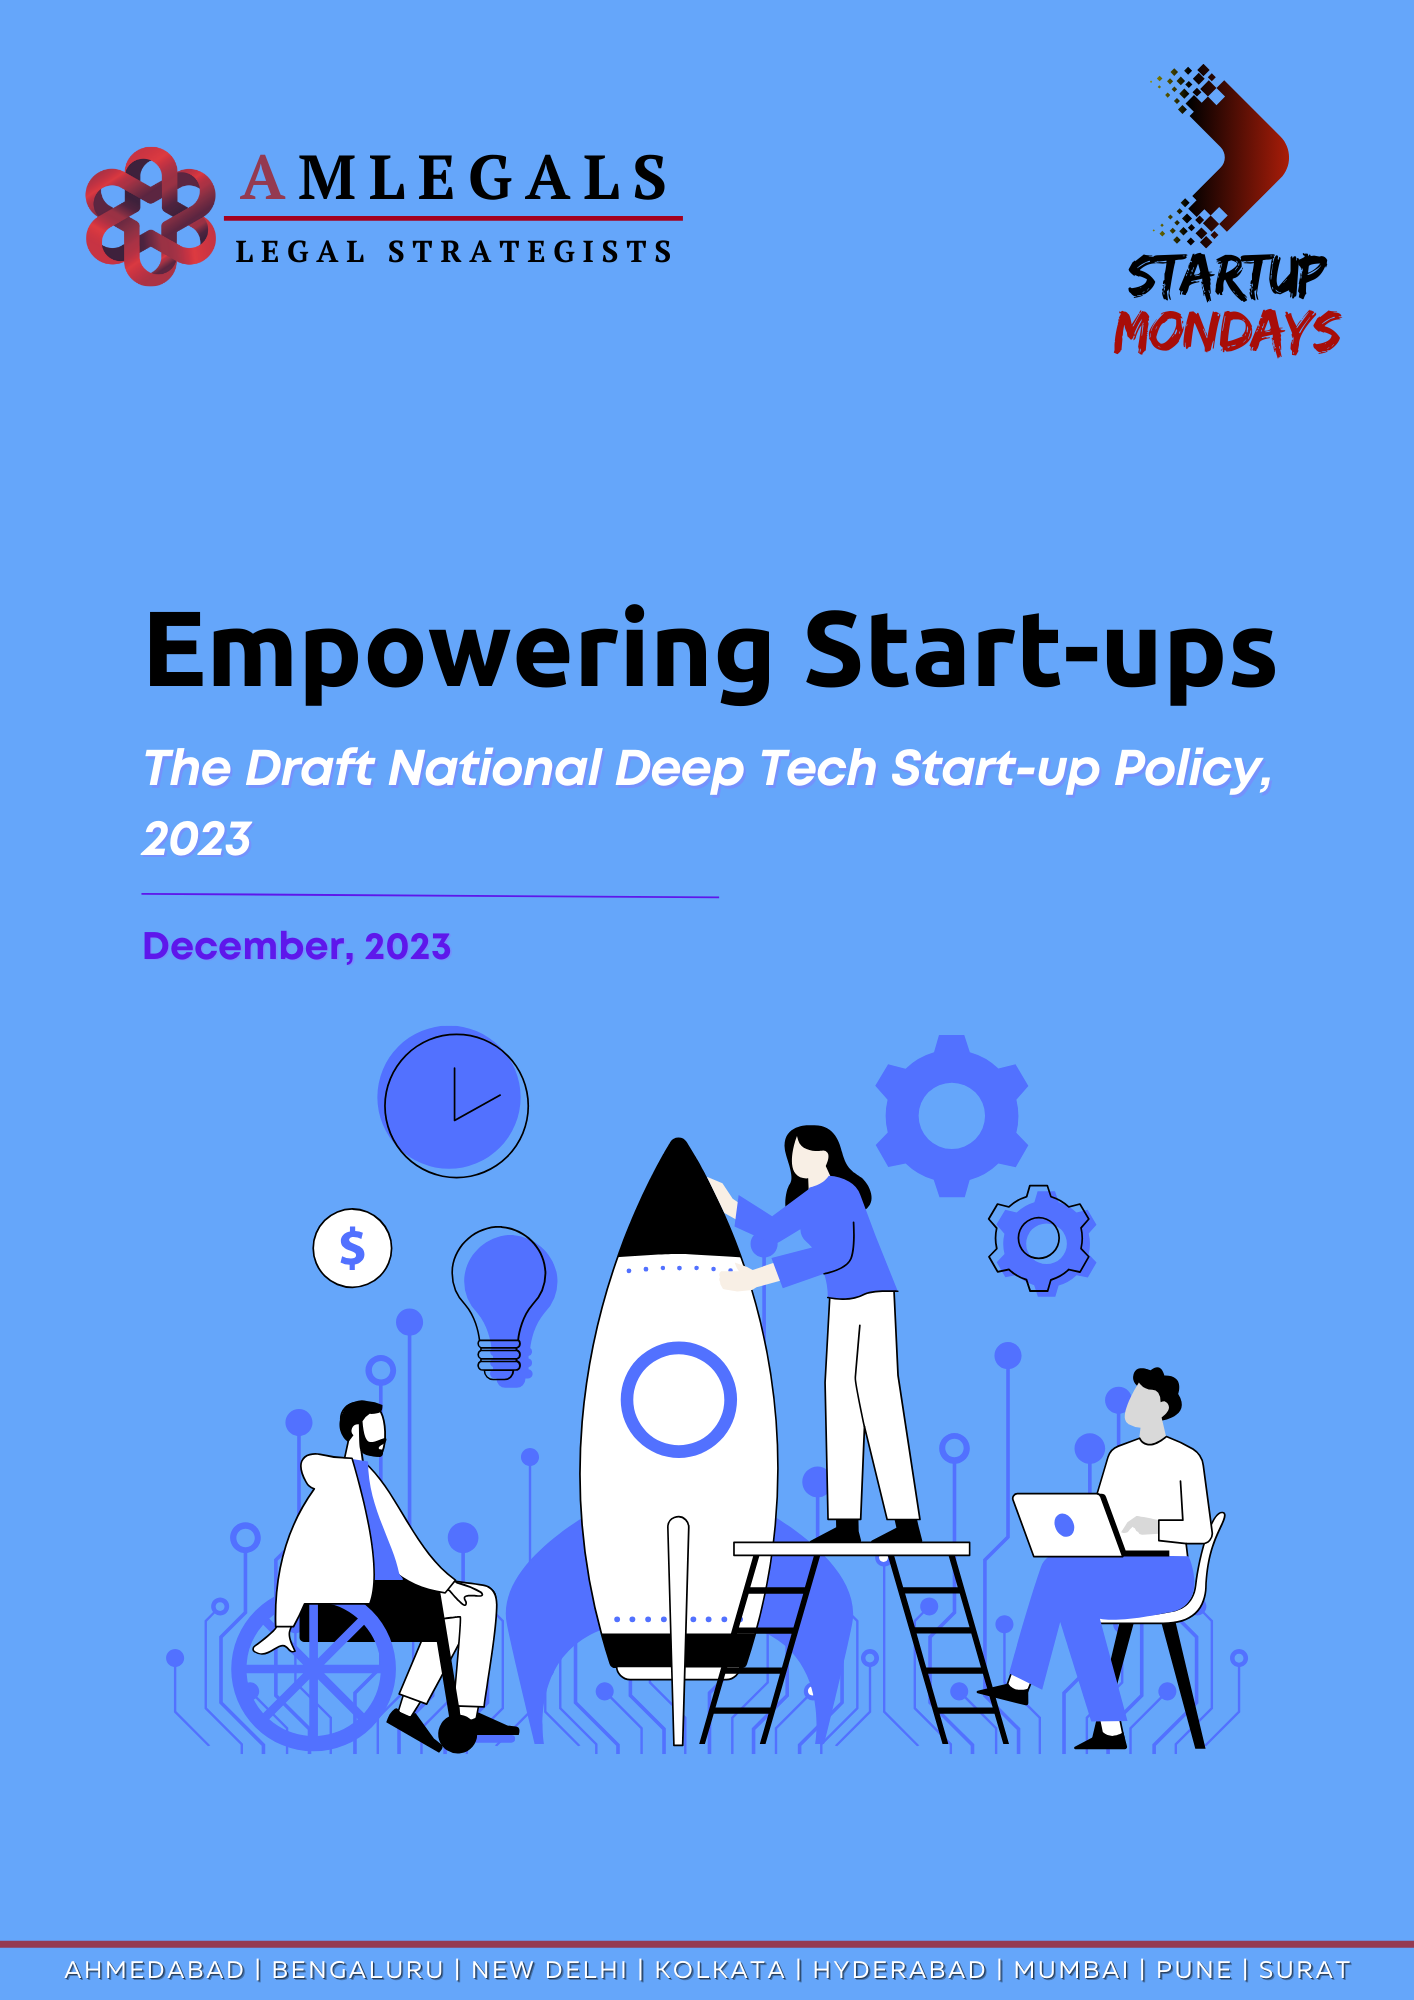 The Draft National Deep Tech Start-up Policy, 2023